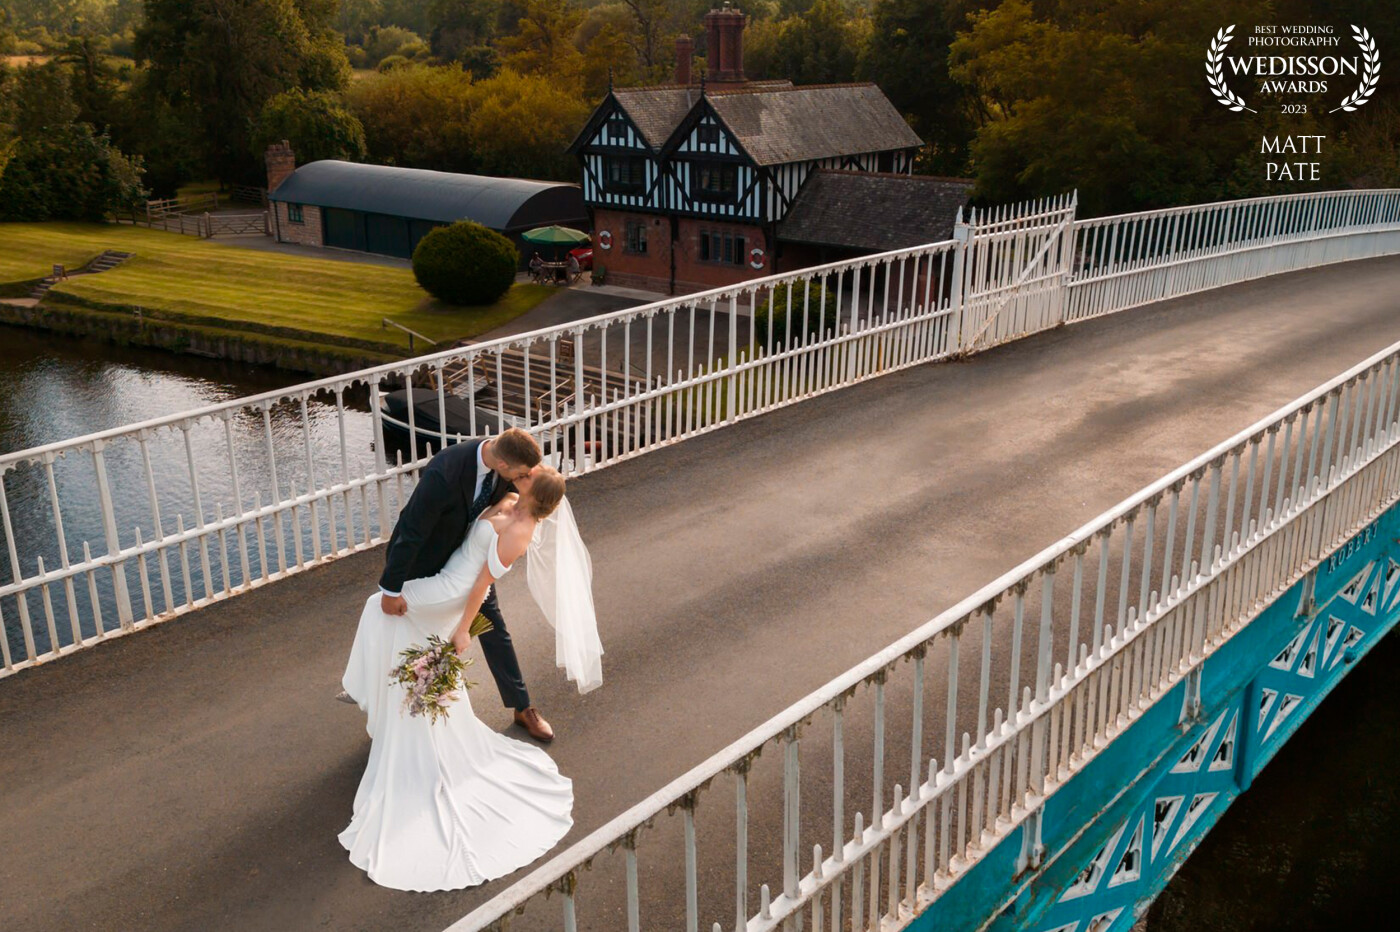 An absolutely stunning location for photographs. I was so pleased when Emma & Rik suggested this location for photographs, after their wedding at Chester Town Hall.<br />
This beautiful iron bridge over the River Dee, was perfect for this image taken using my drone.